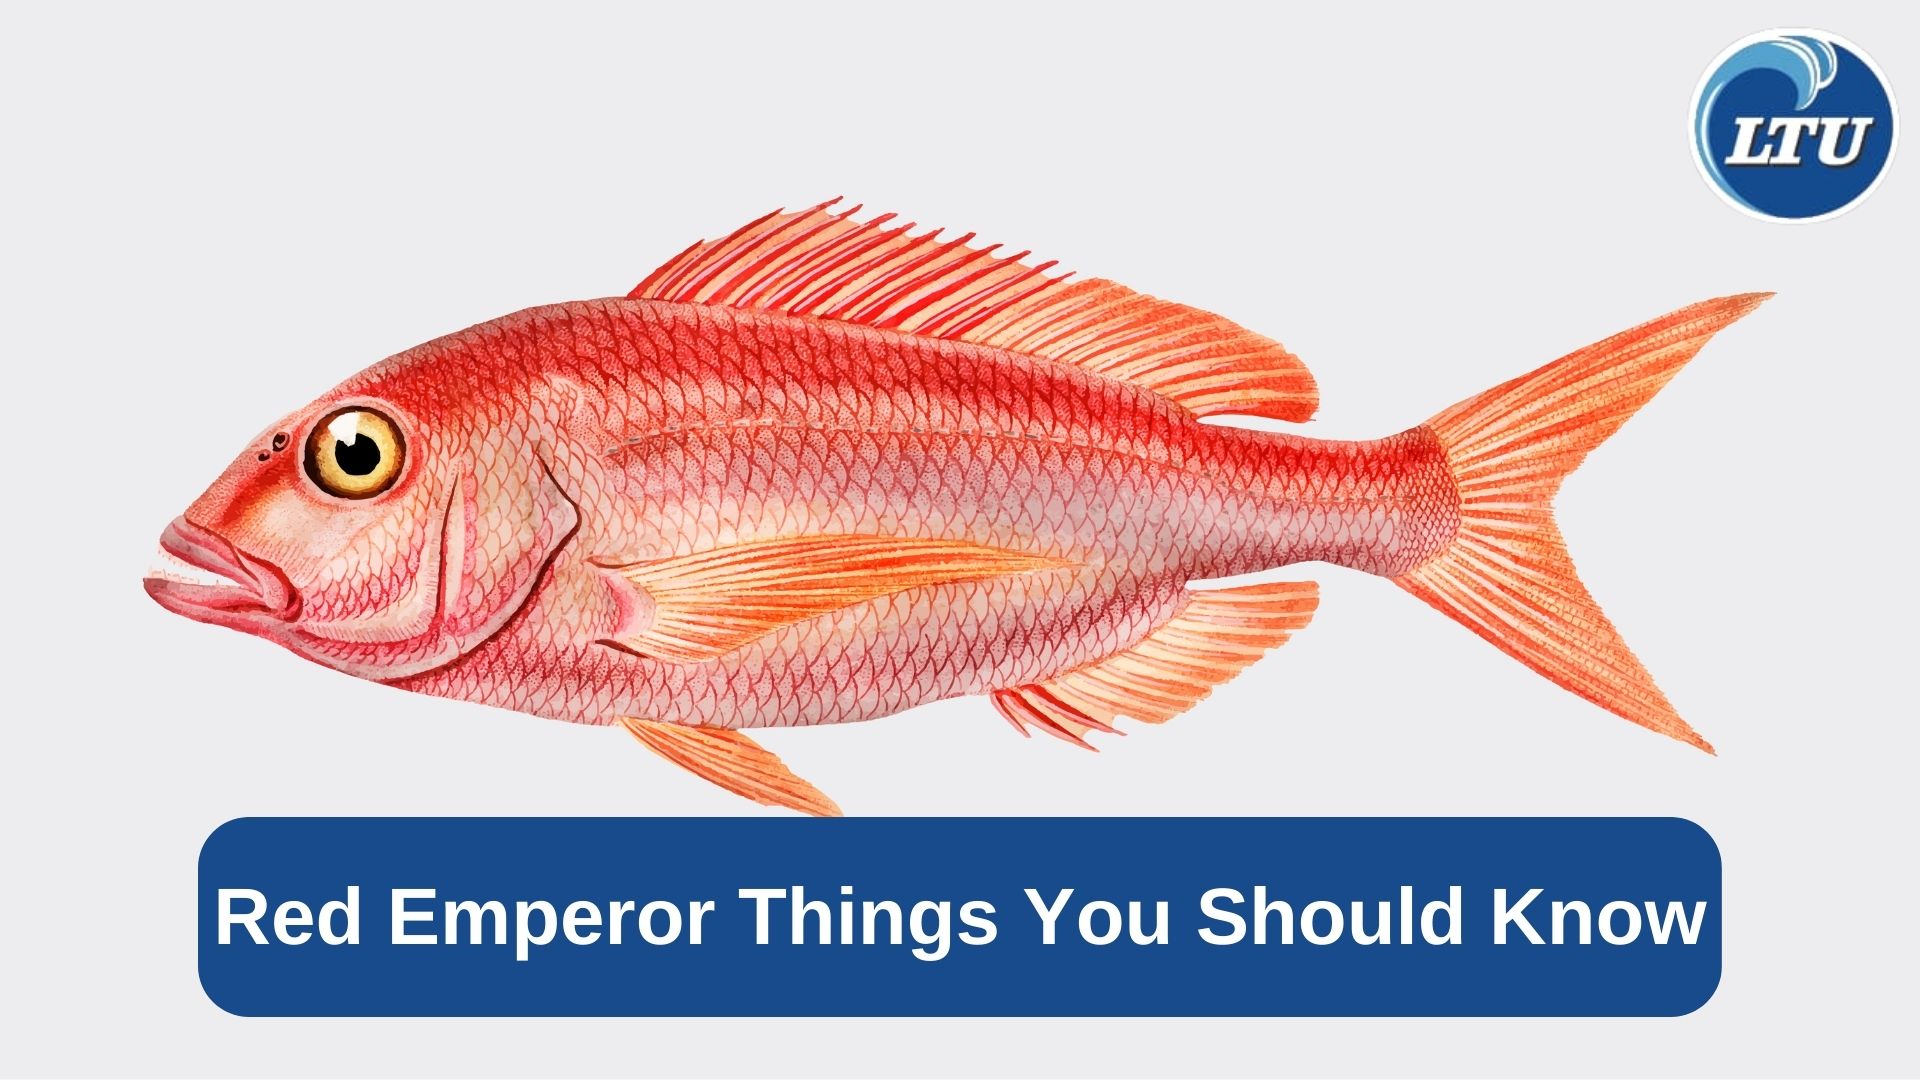 Red Emperor Things You Should Know